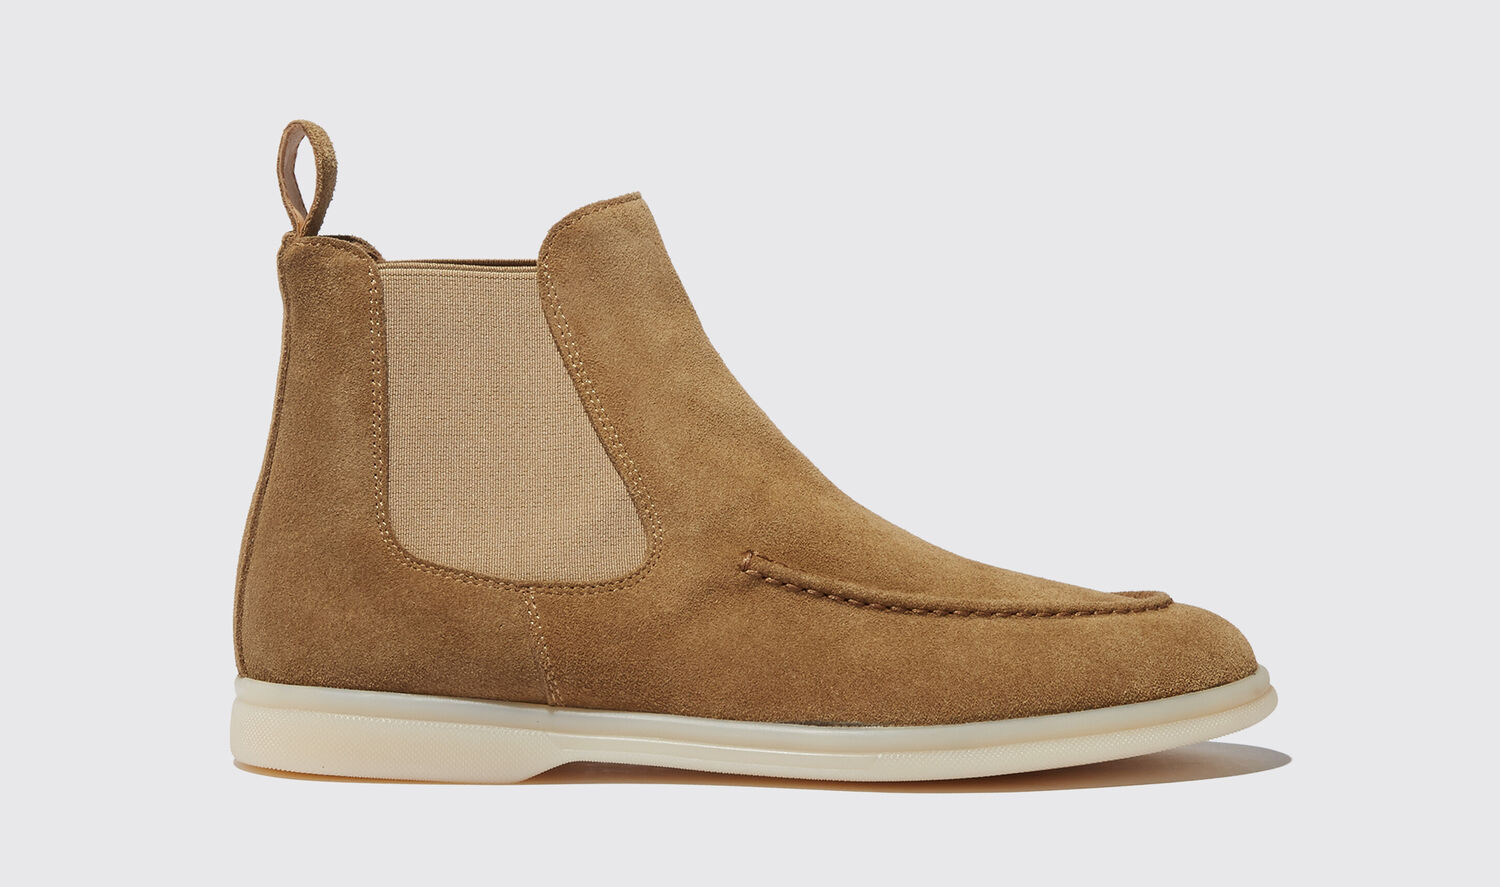 Scarosso Eugenia Suede Ankle Boots In Beige - Suede Leather